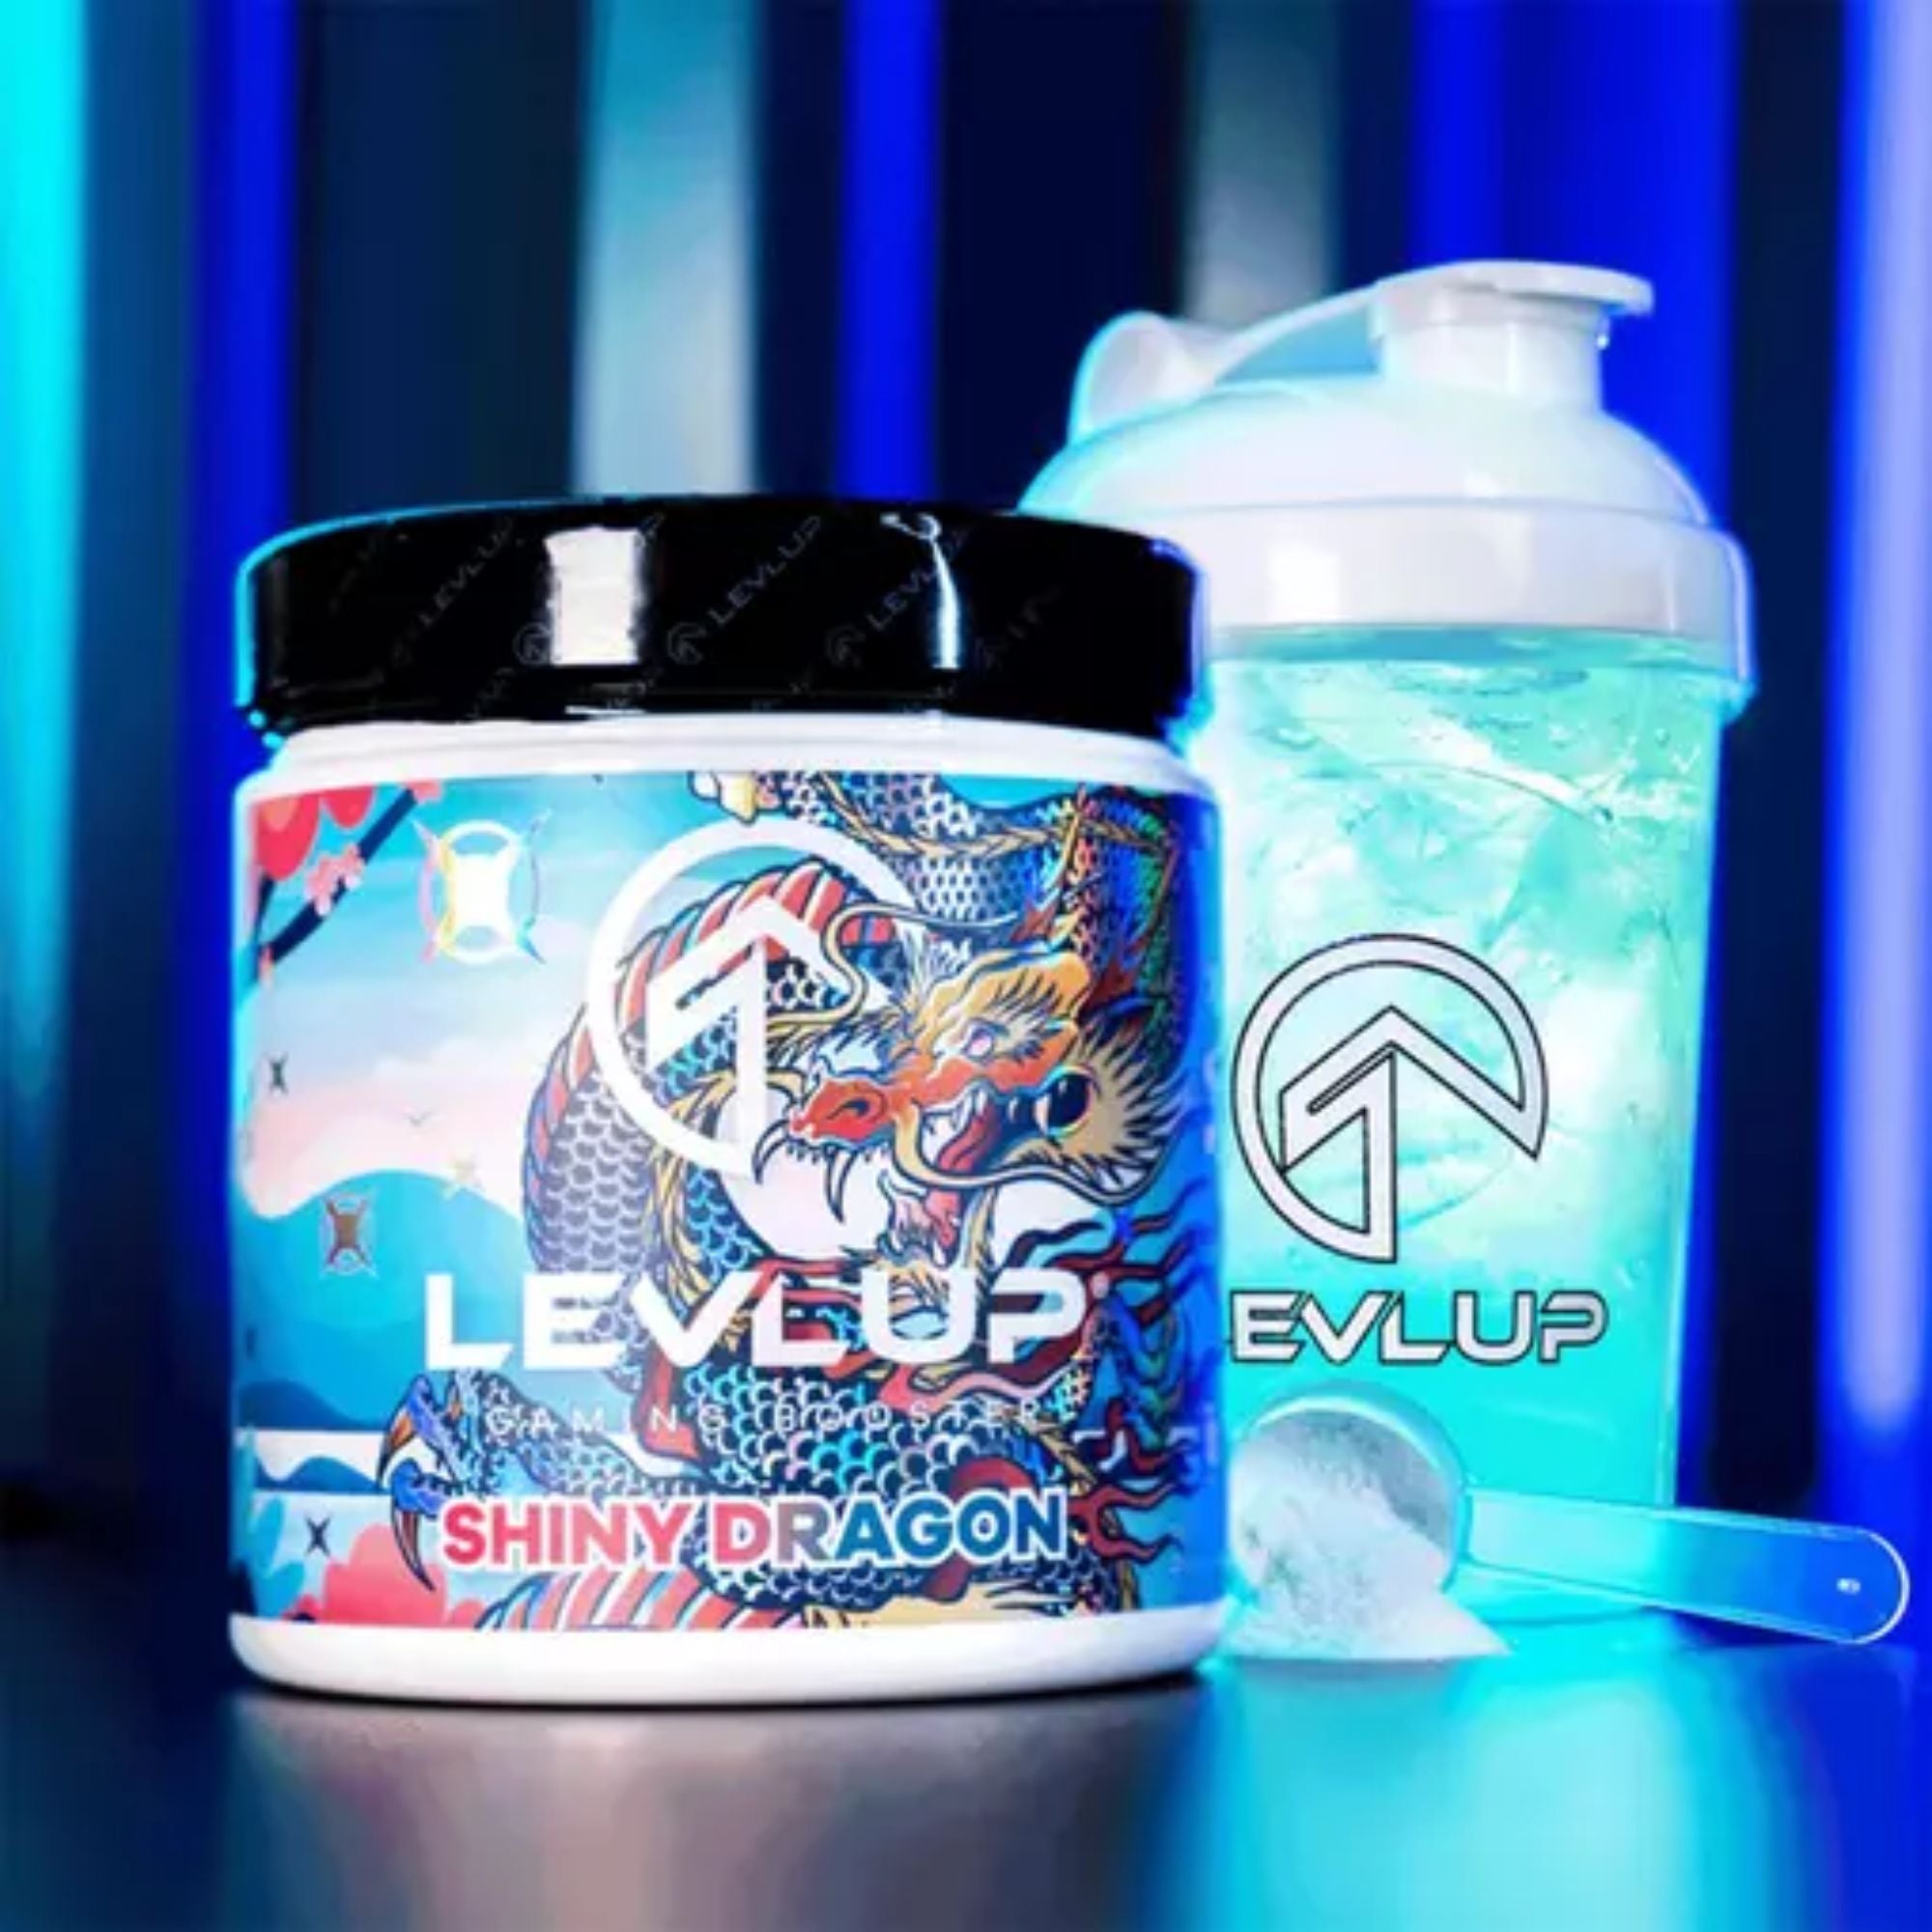 LevlUp Gaming Booster Performance Supplement